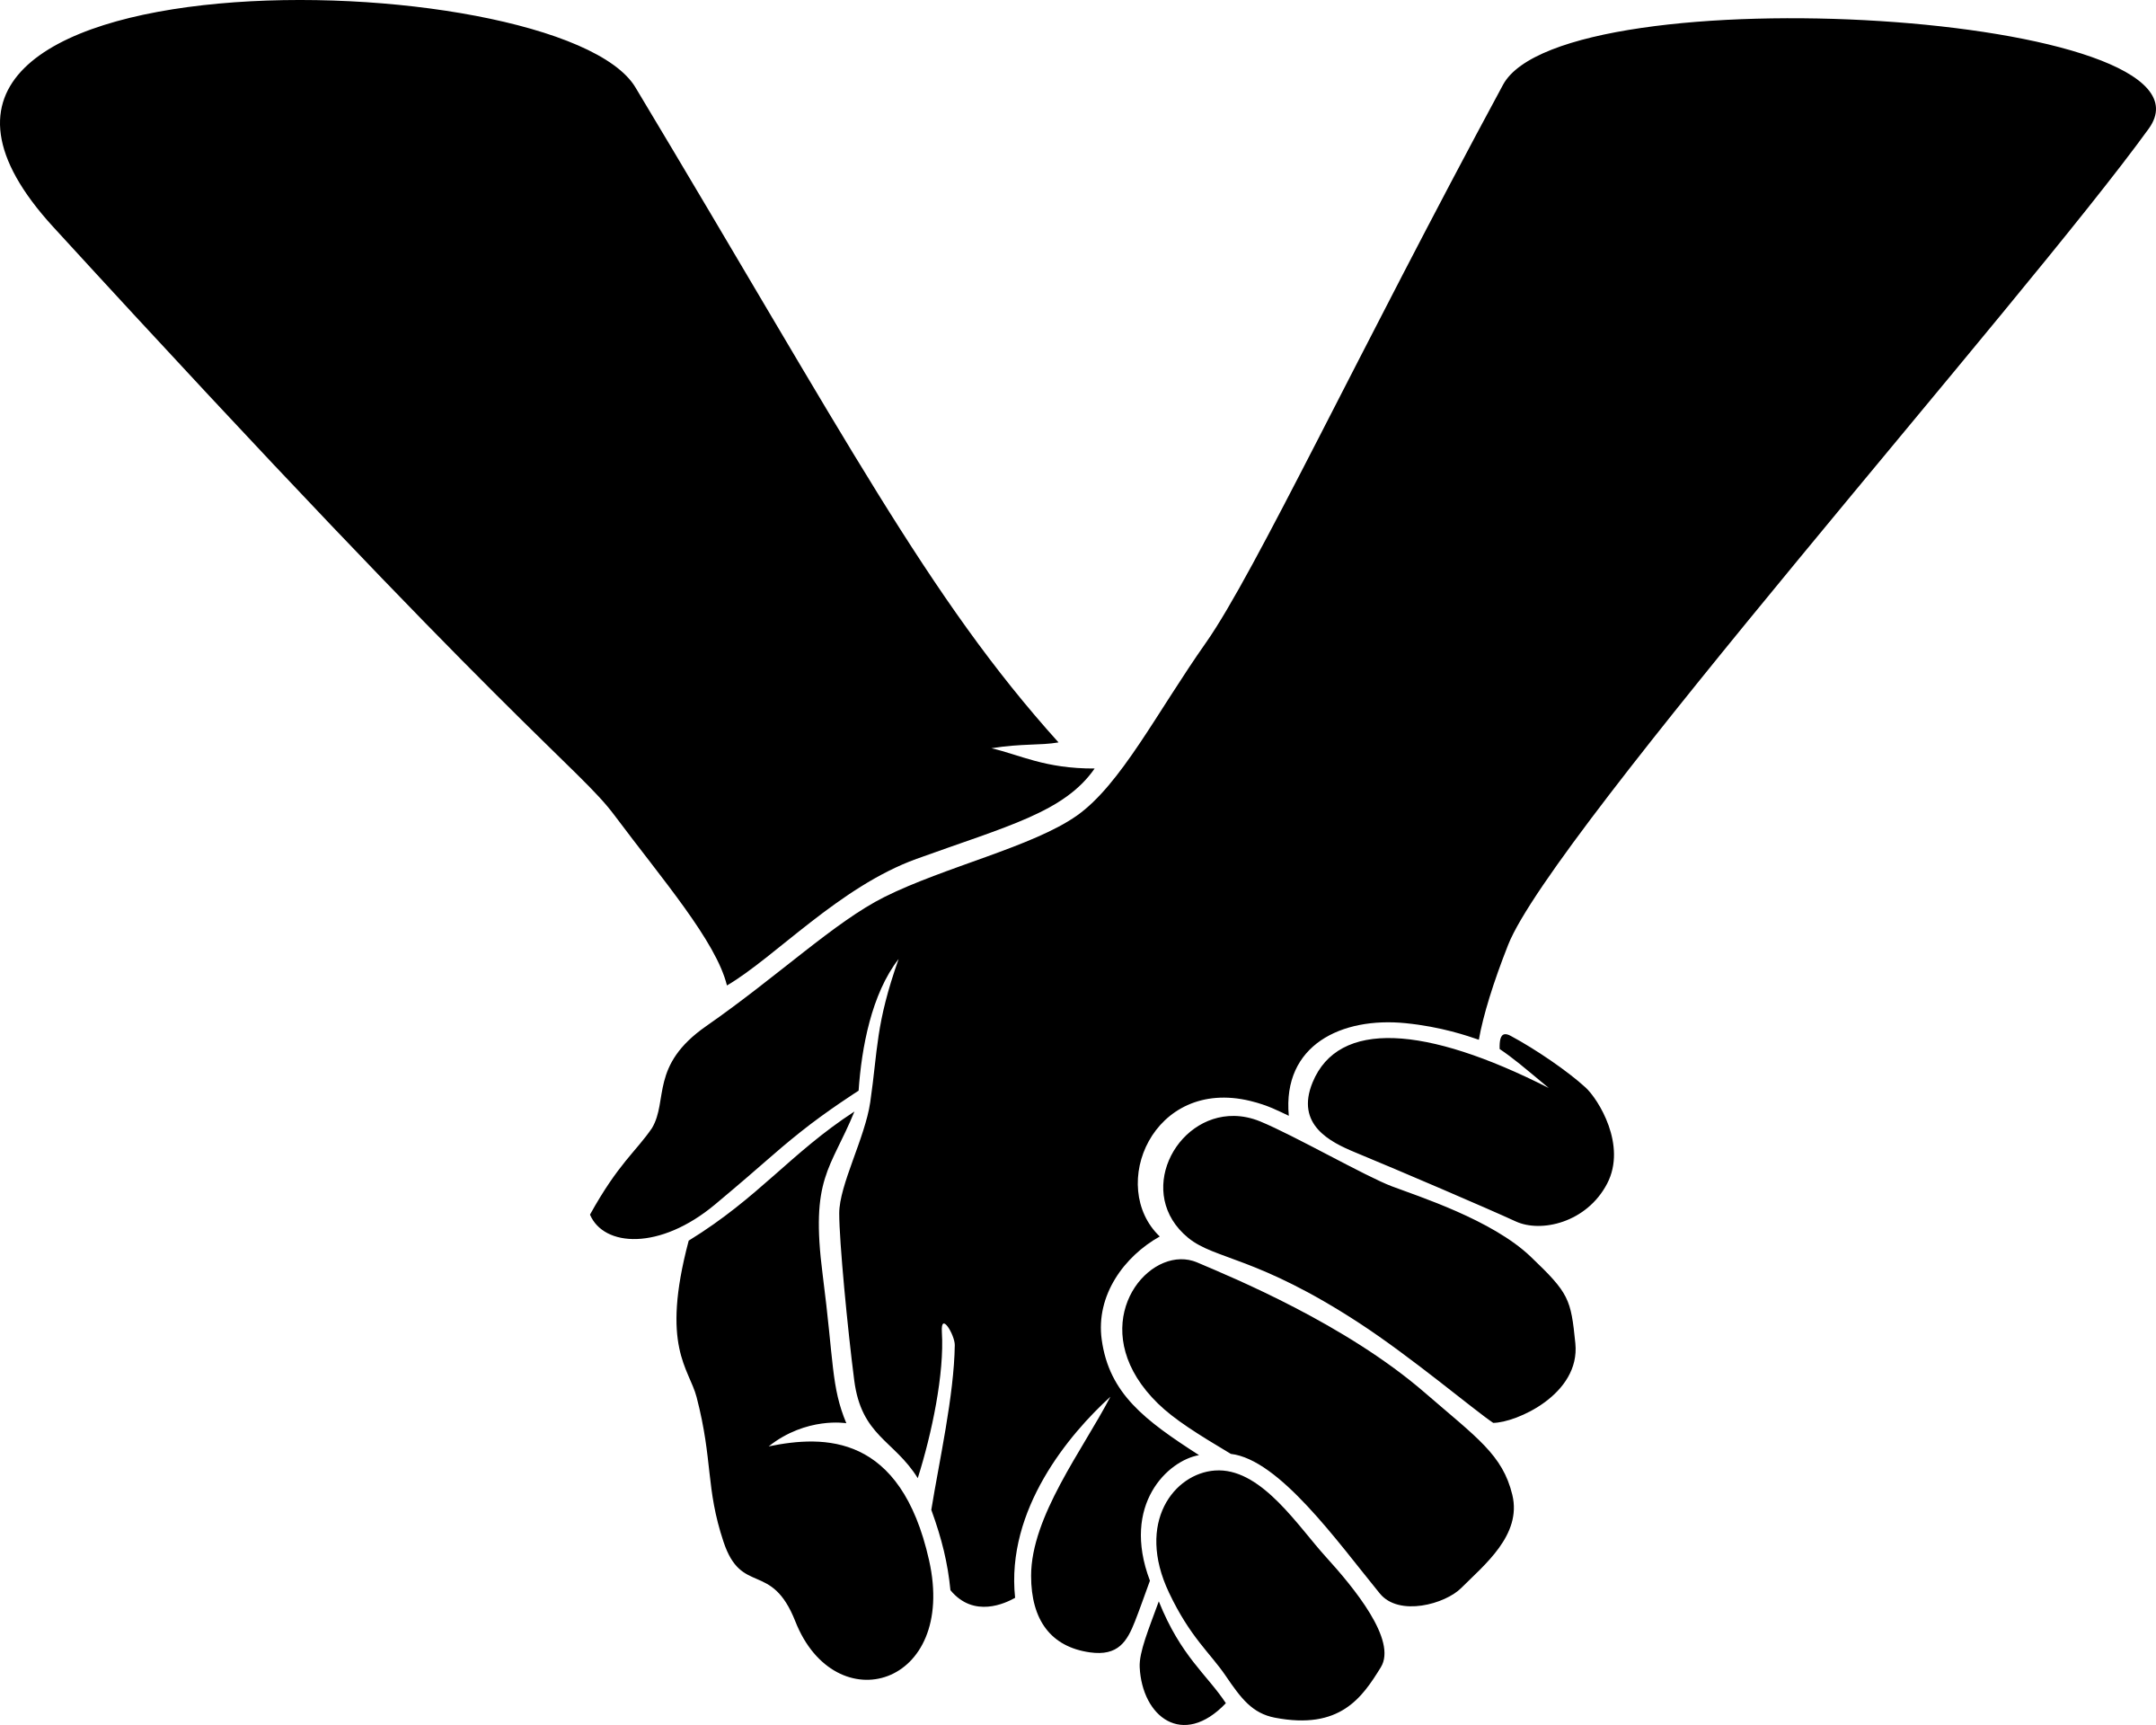 Hands holding clipart